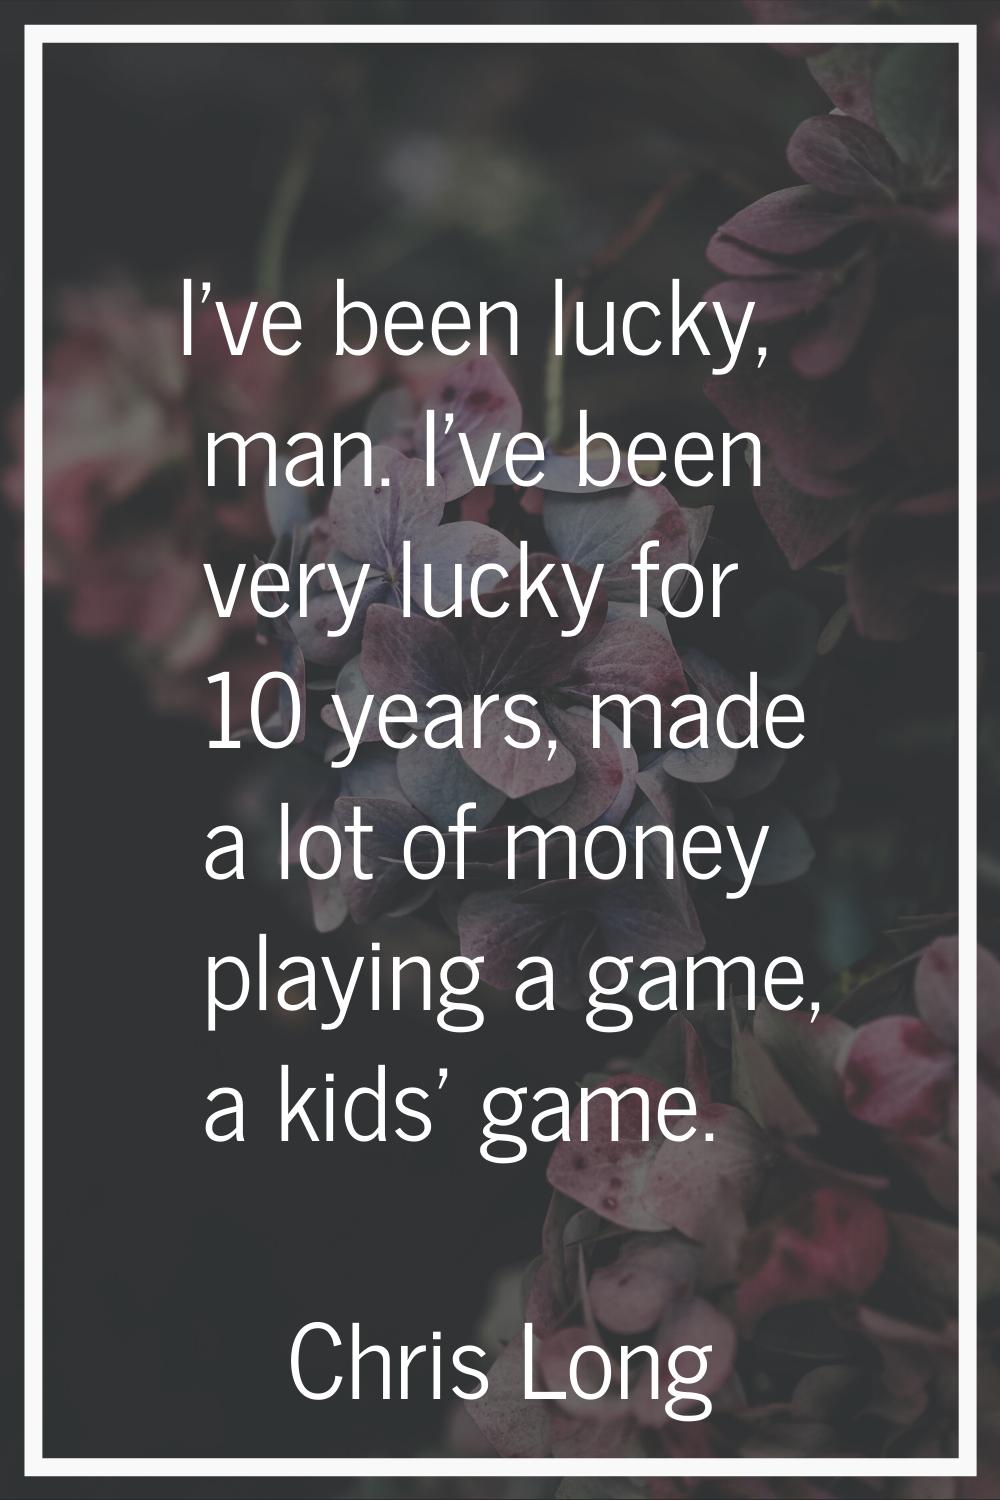 I've been lucky, man. I've been very lucky for 10 years, made a lot of money playing a game, a kids